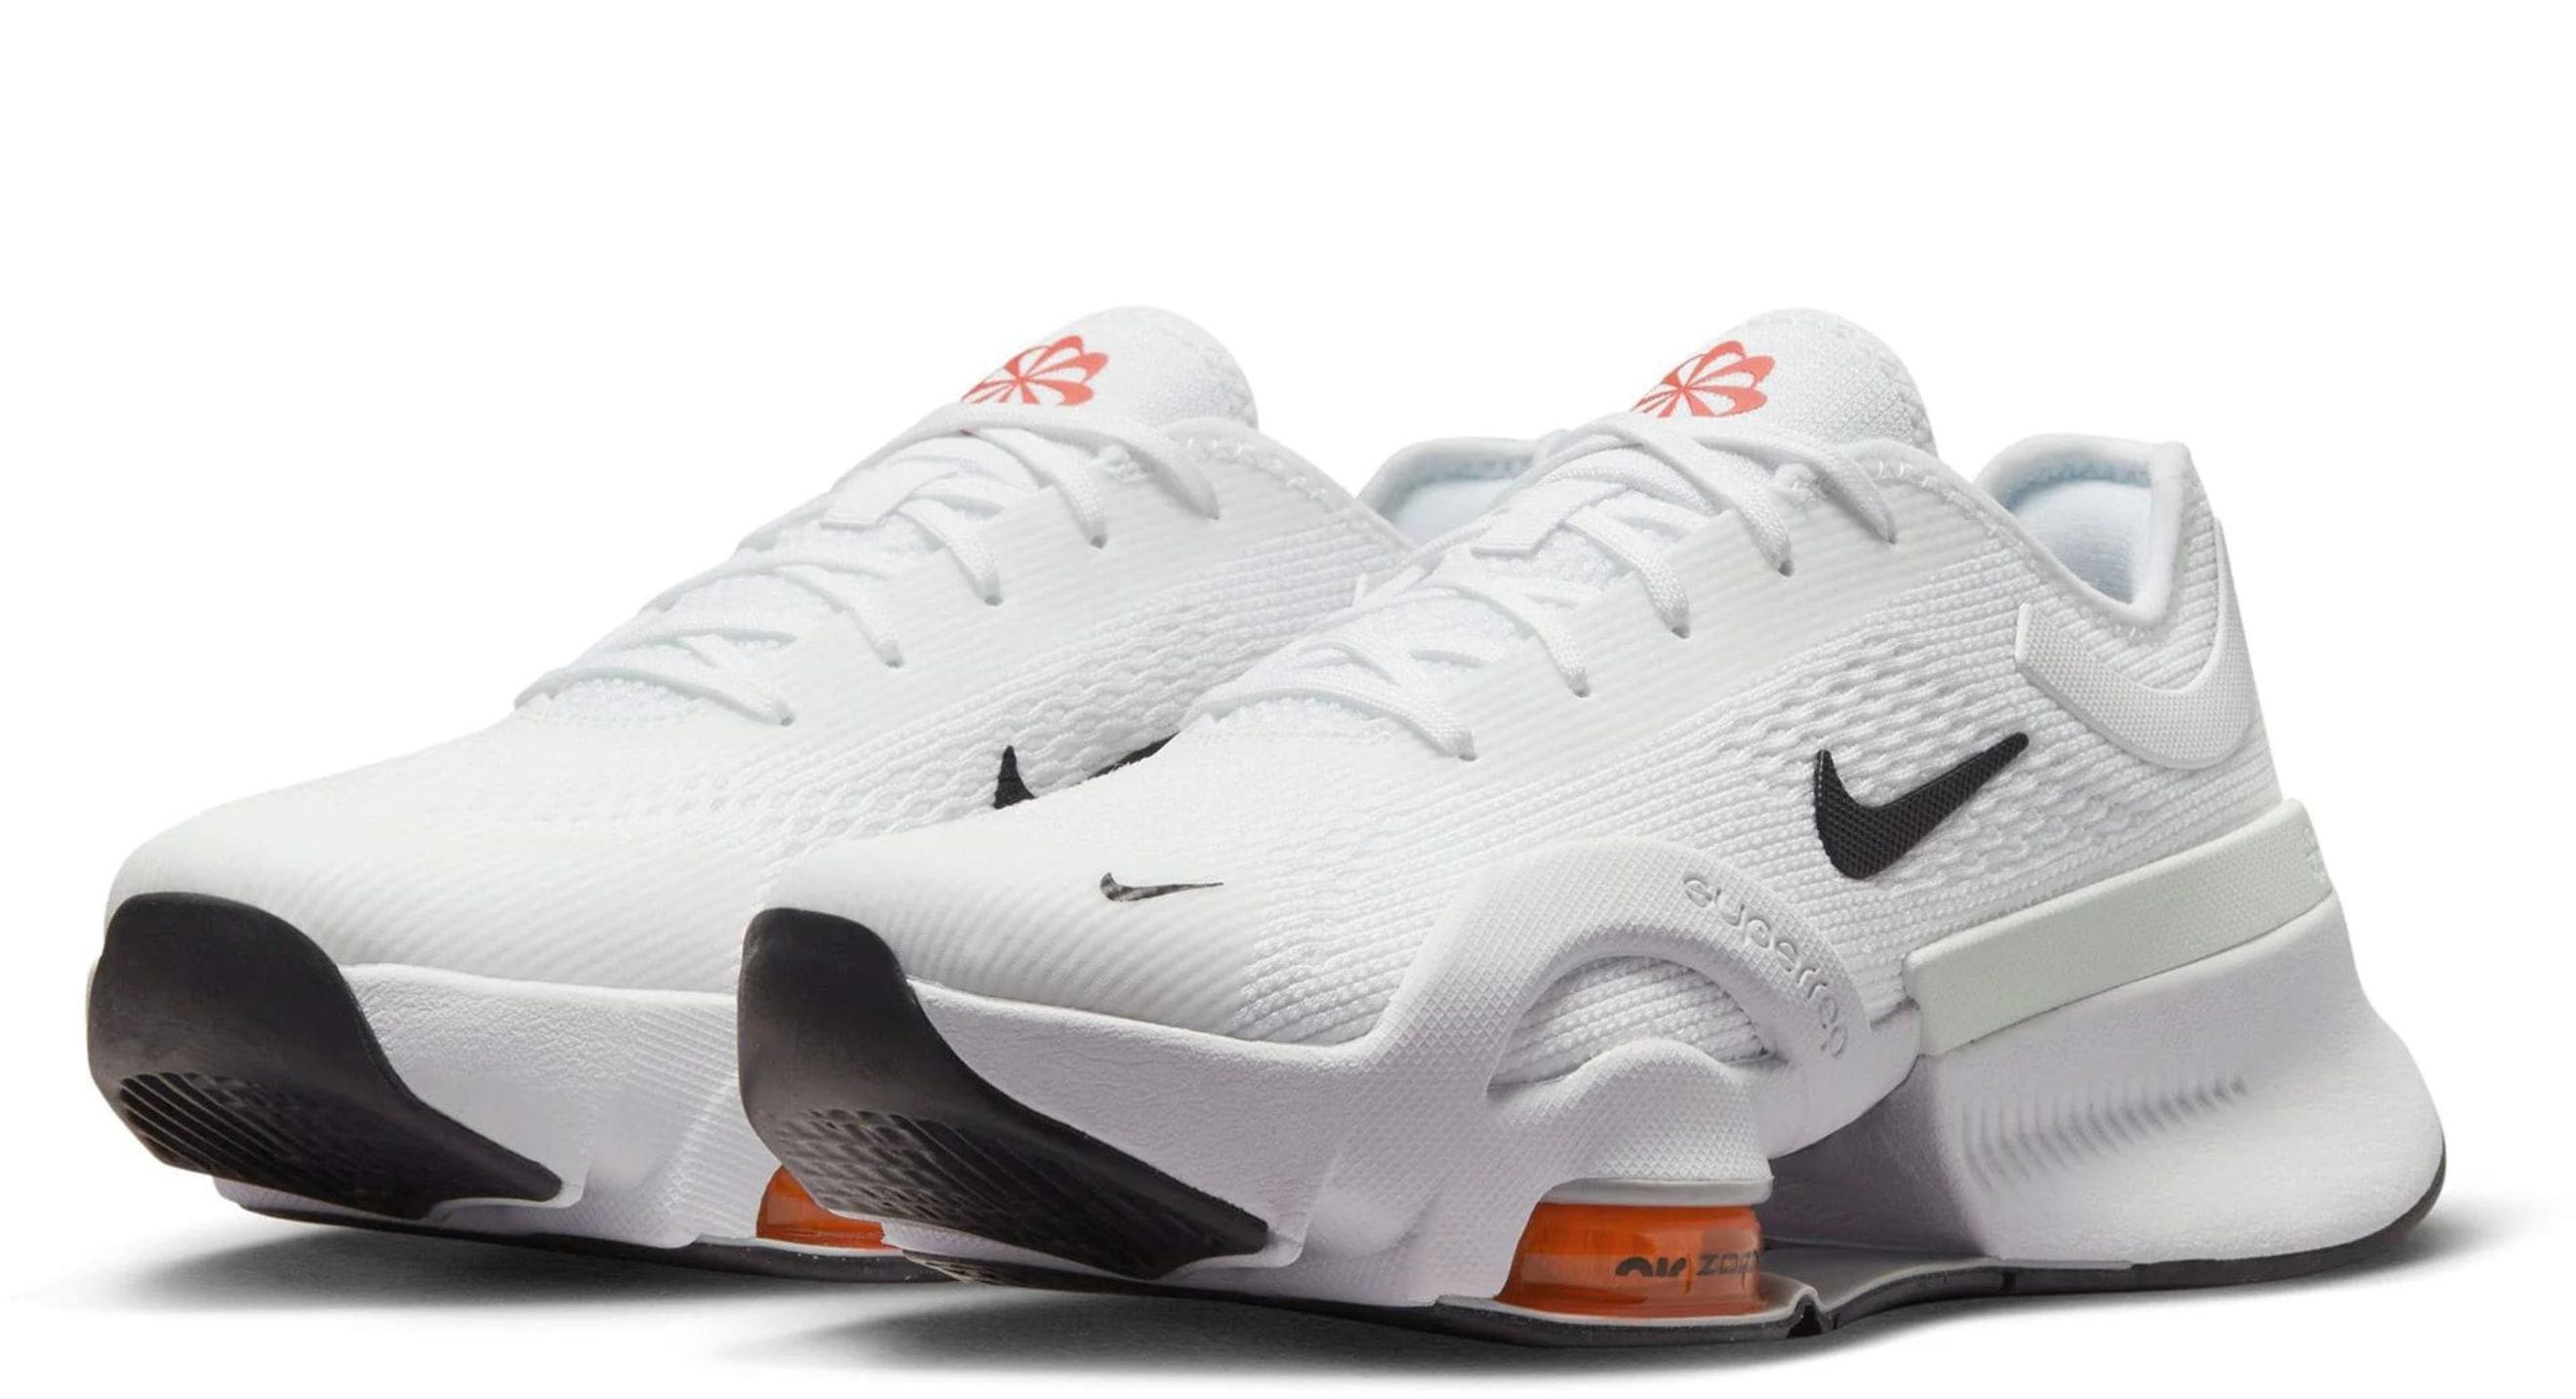 Need Help Finding: Nike Mercurial Air Max Plus Tn. Was able to